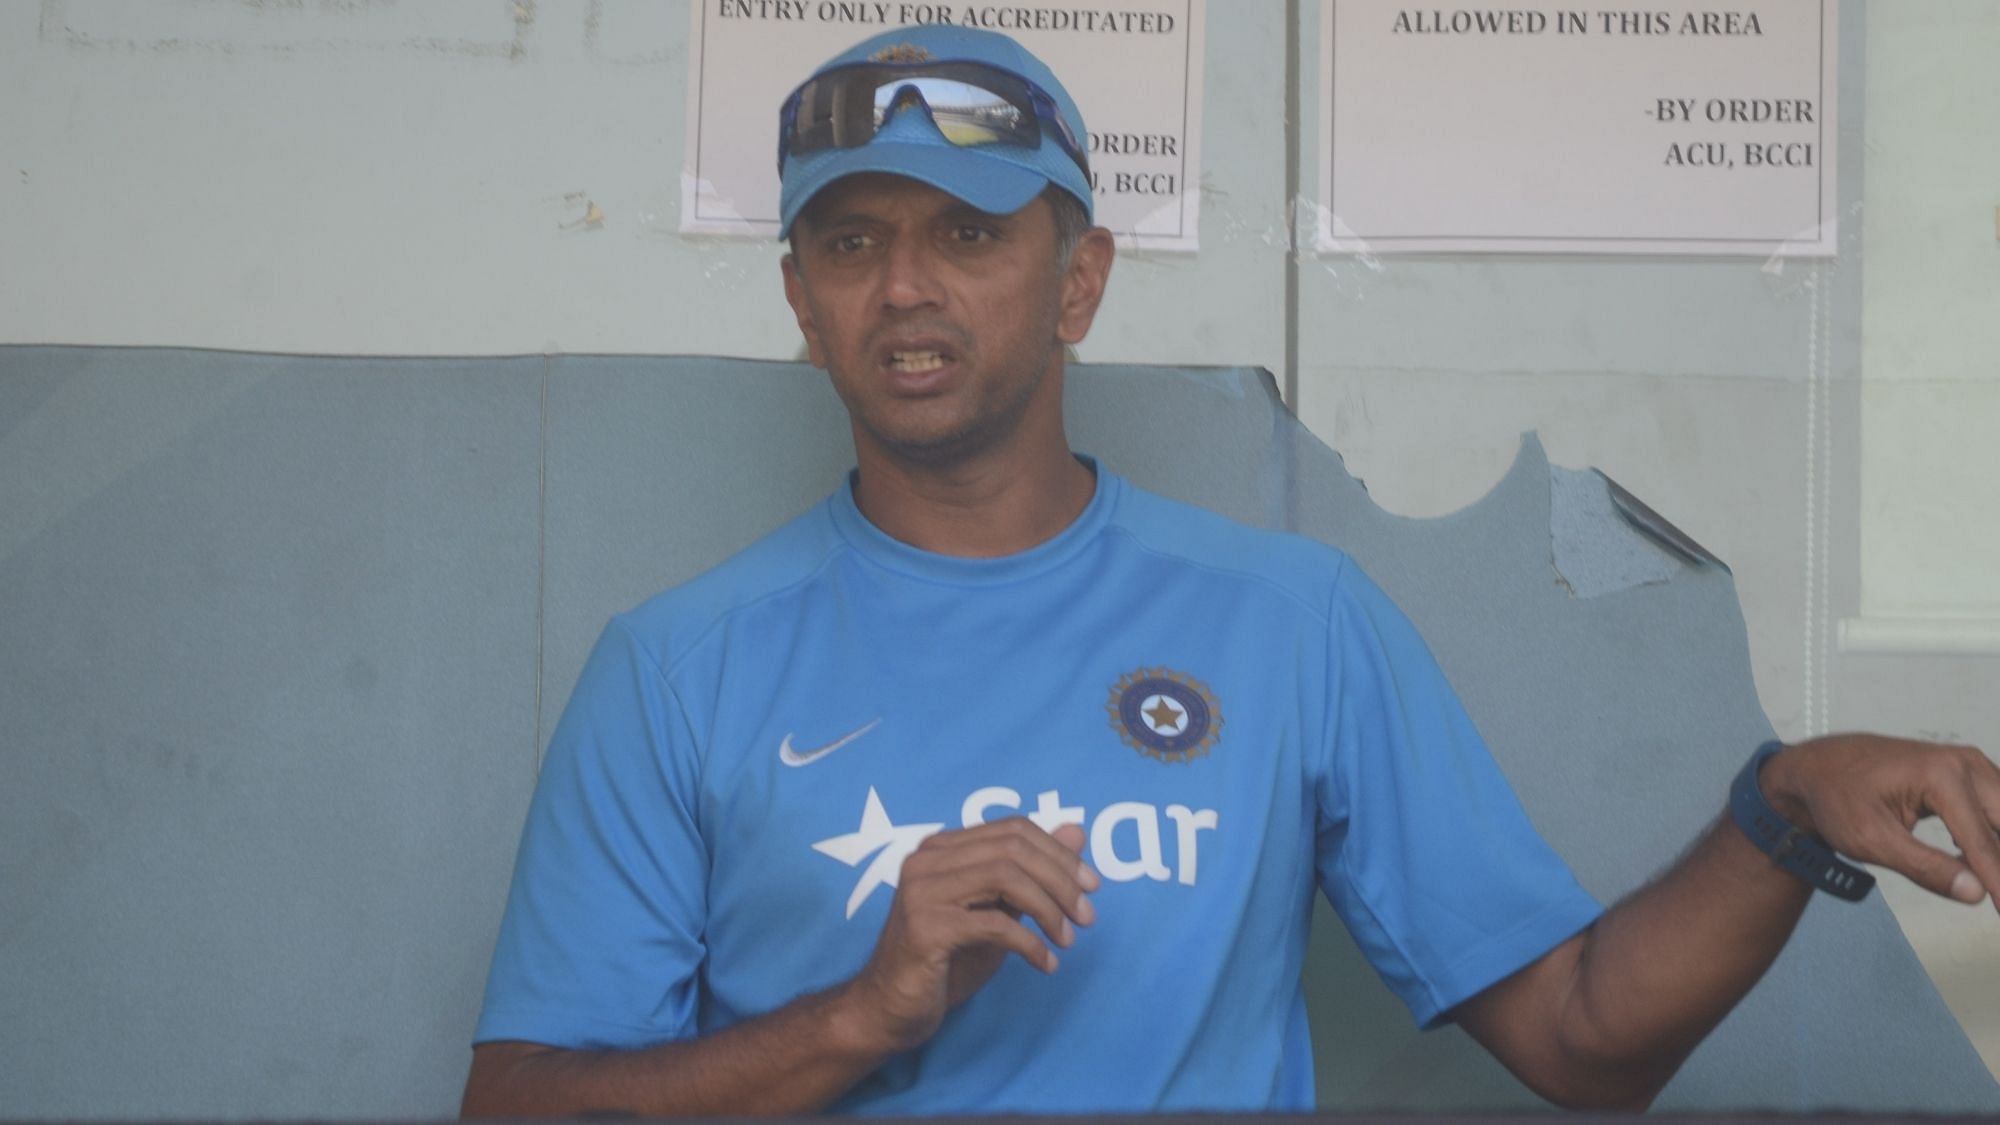 MPCA Member Sanjeev Gupta had complained against Dravid citing a conflict in his role as the head of NCA along side being an employee of India Cements.